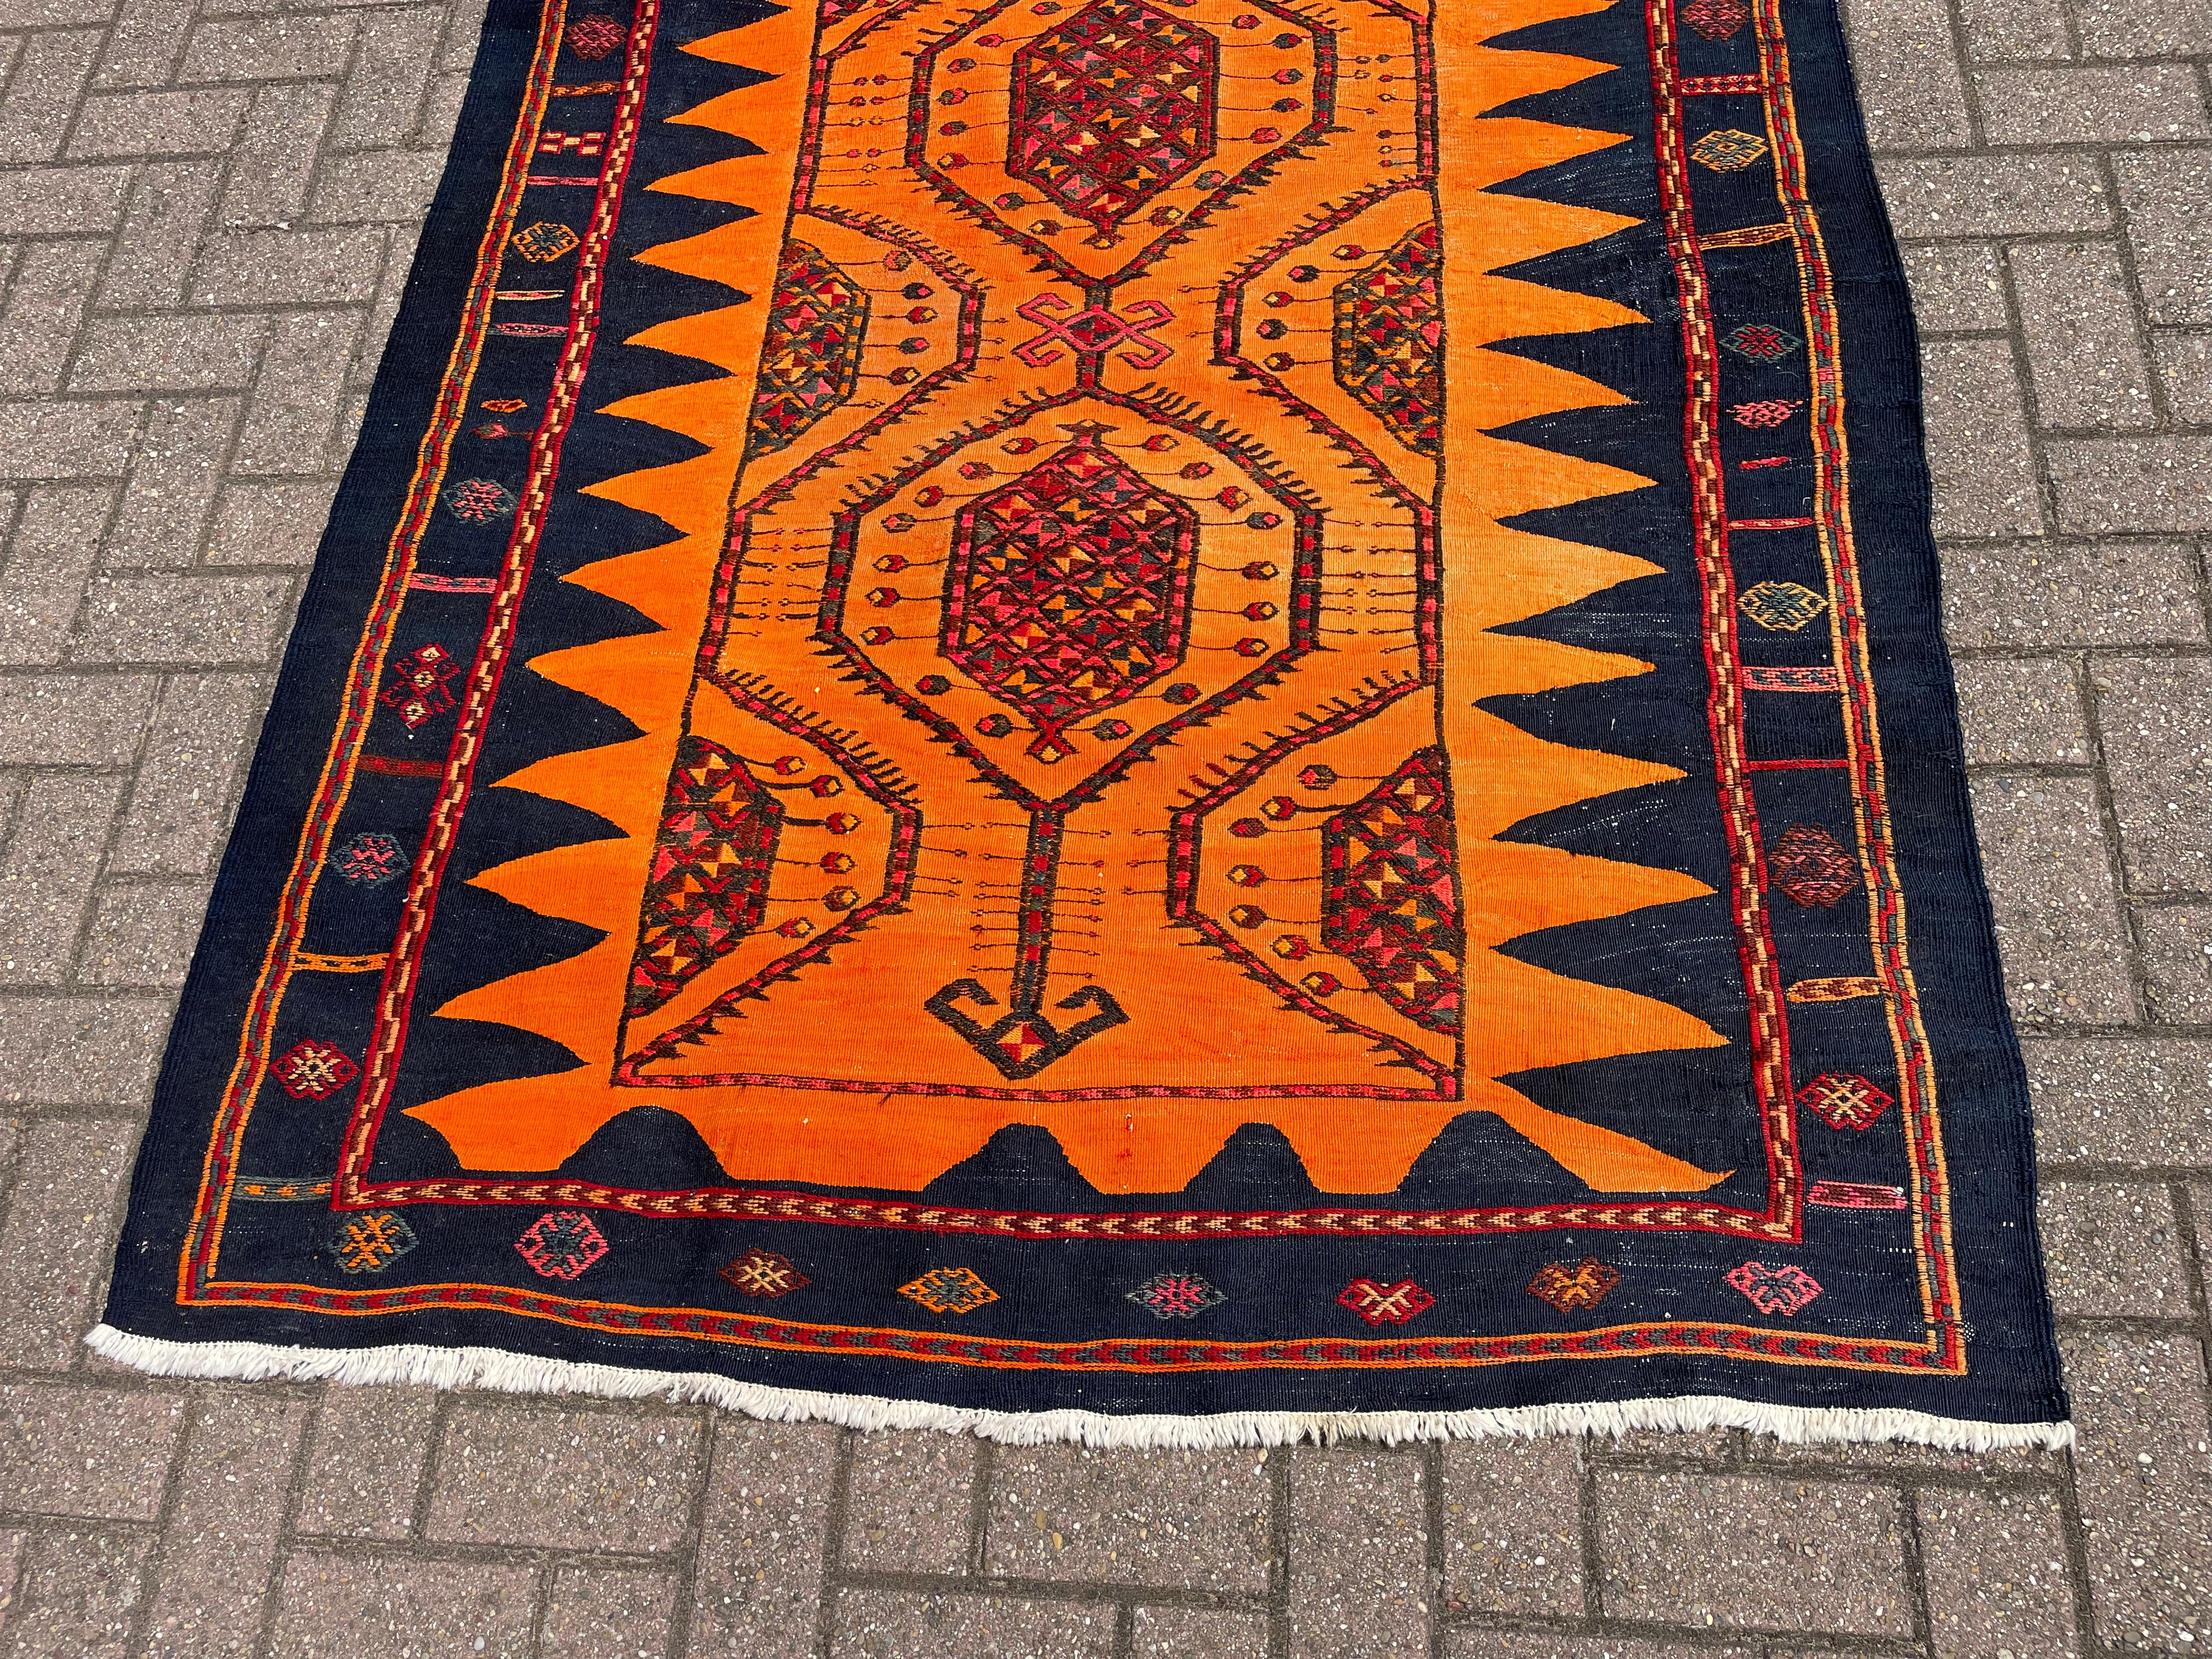 Unknown Stunning & Large Size Hand Knotted Kilim Rug Midcentury Design w. Vibrant Colors For Sale